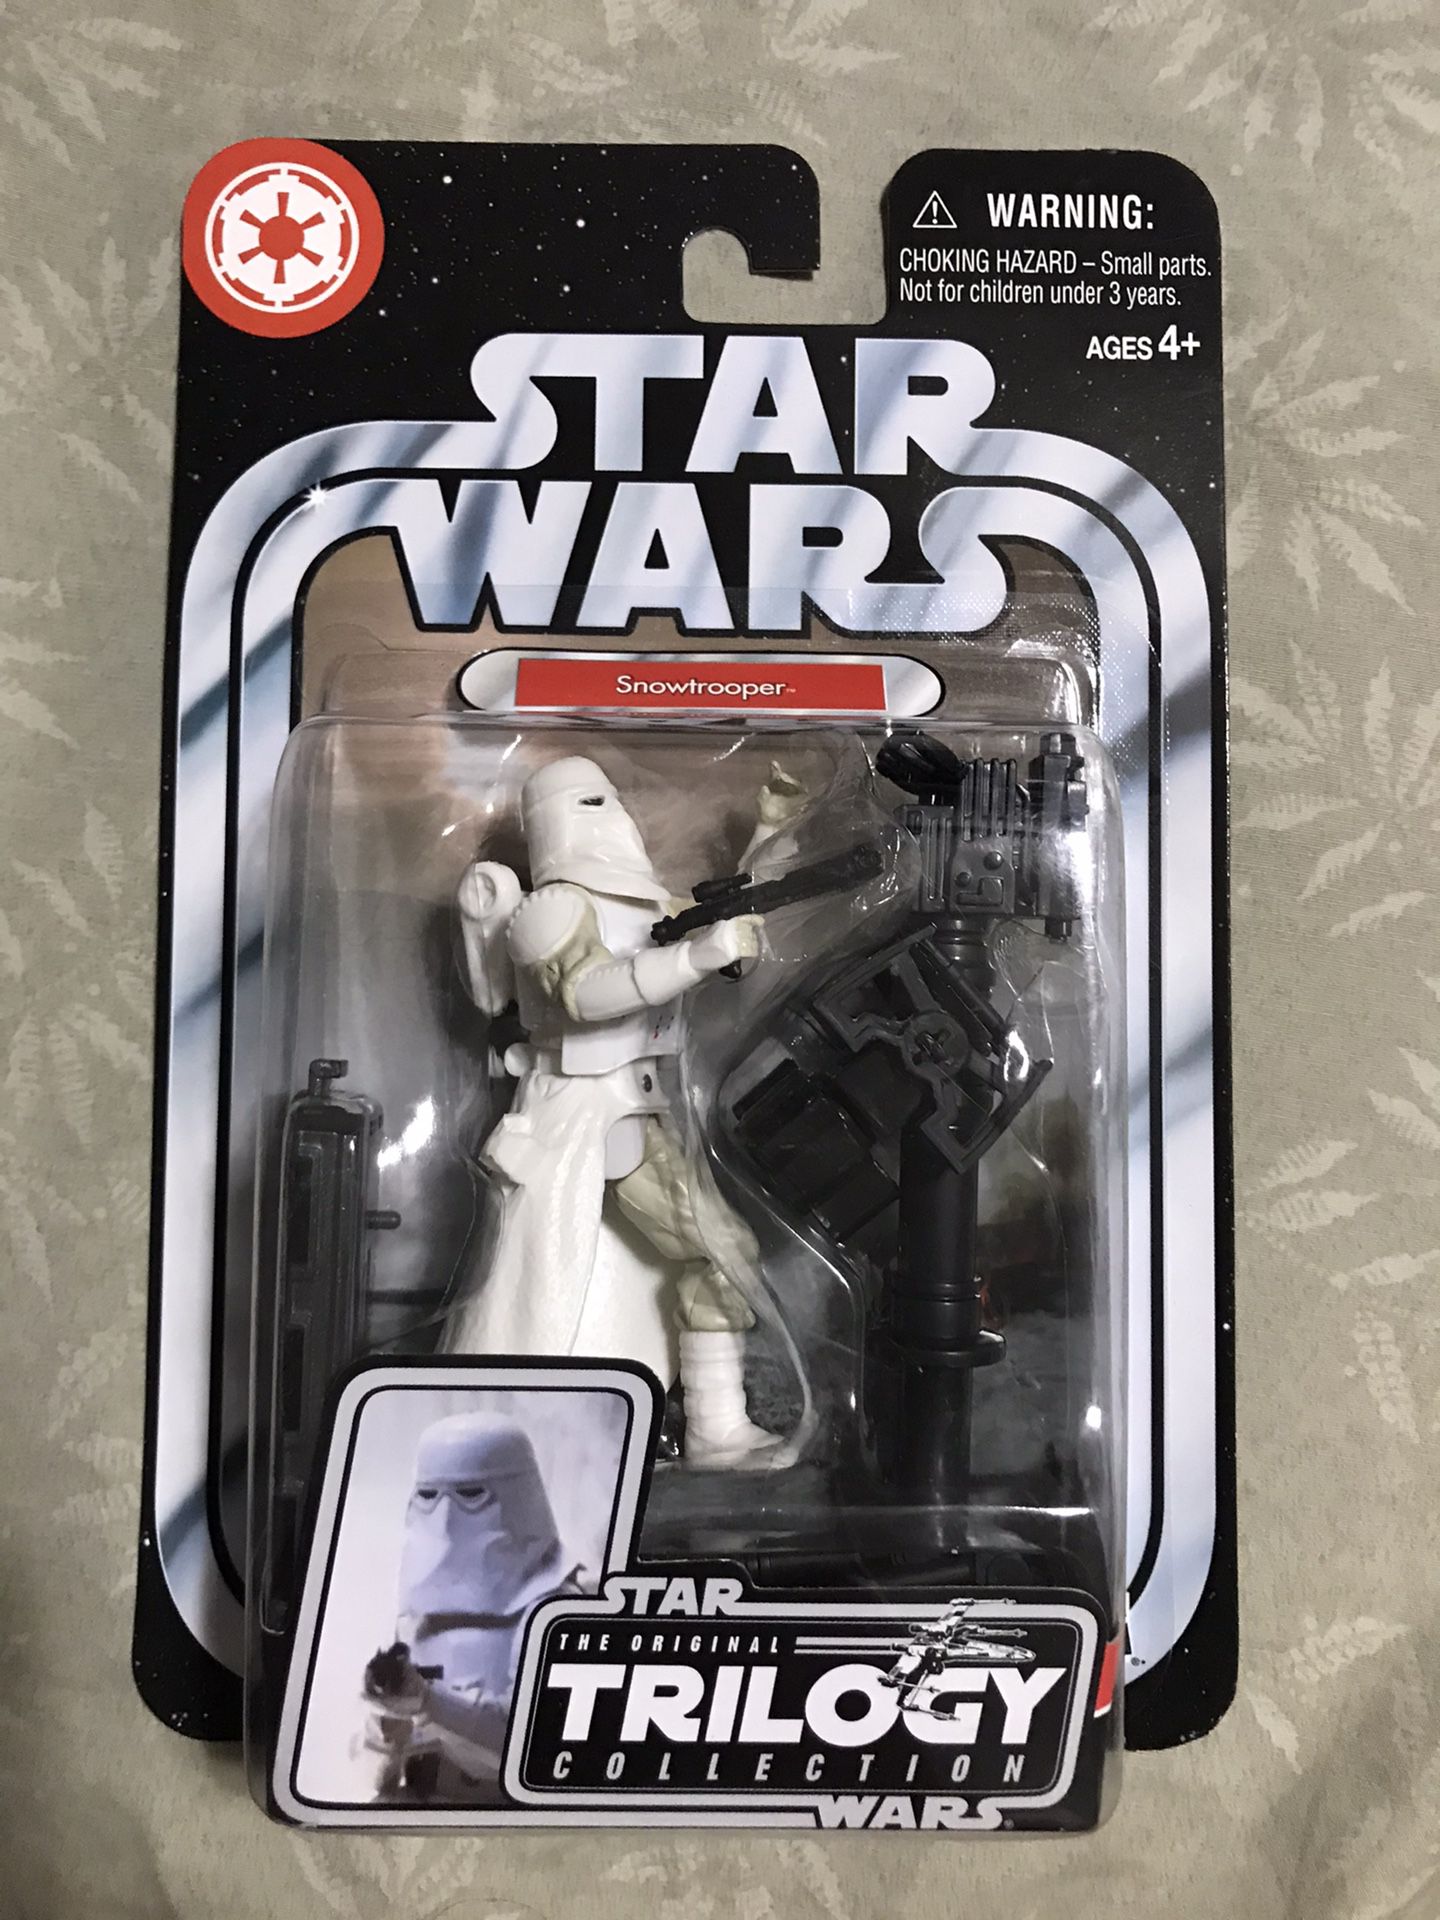 Star Wars, The Original Trilogy Collection Action Figure, Snowtrooper #25, 3.75